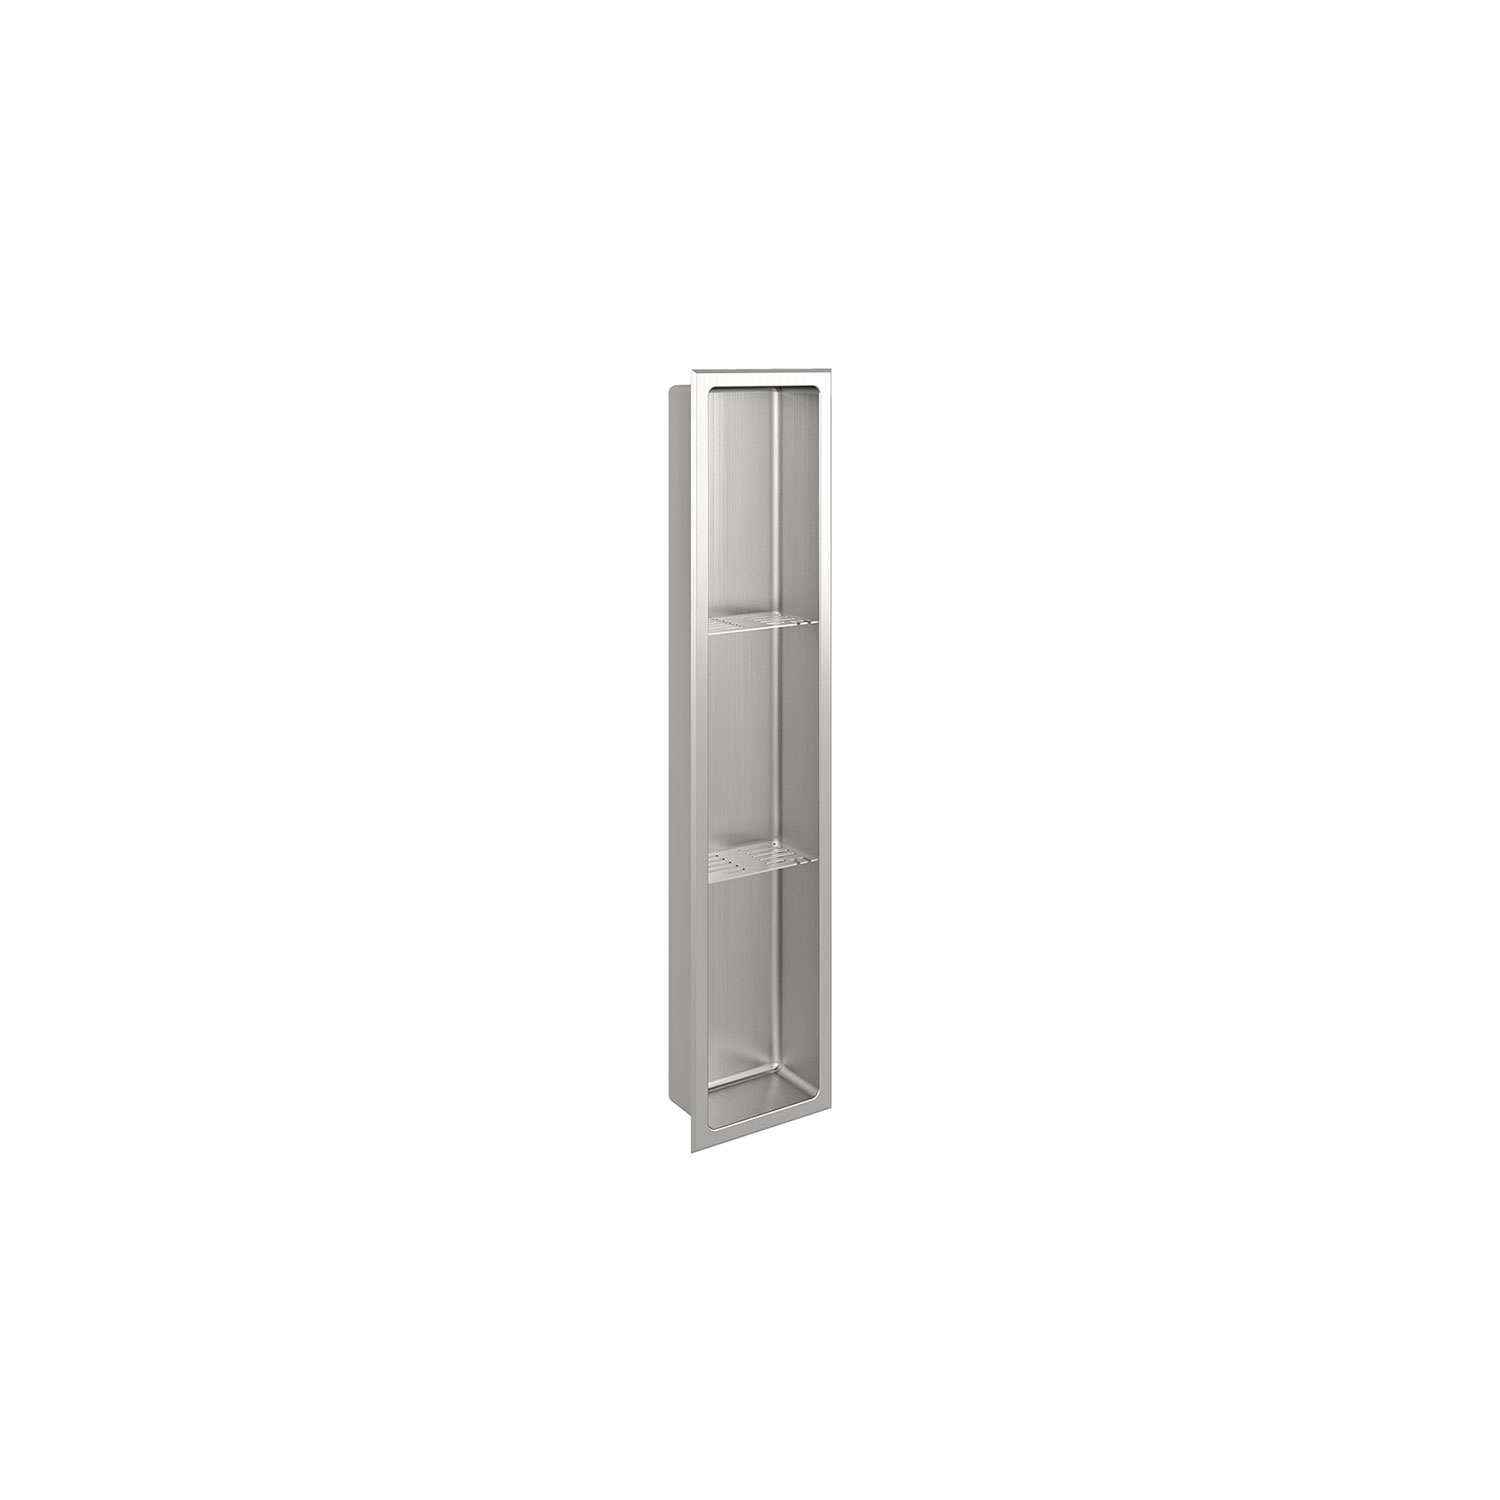 Brushed stainless steel niche 36